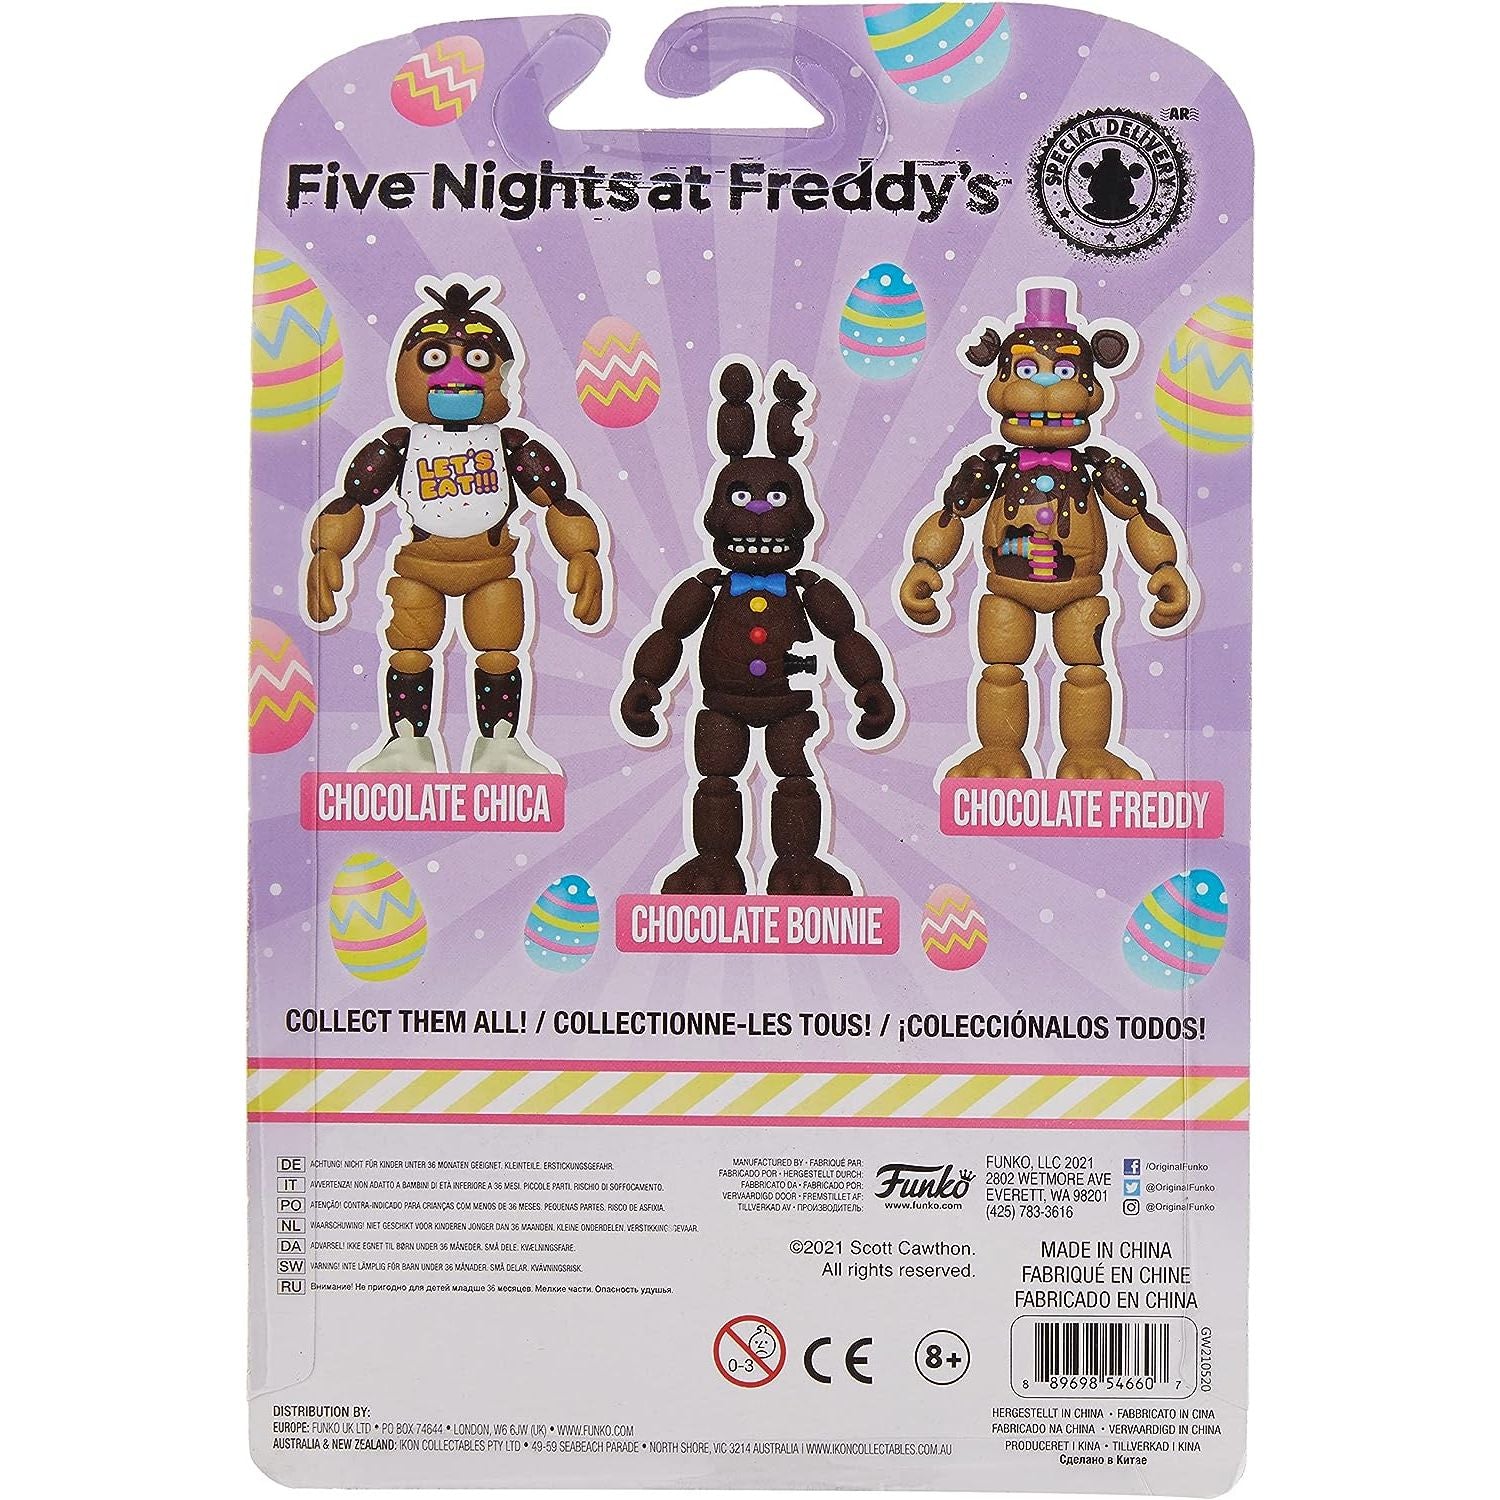 Funko Action Figure Five Nights at Freddy's- Chocolate Freddy